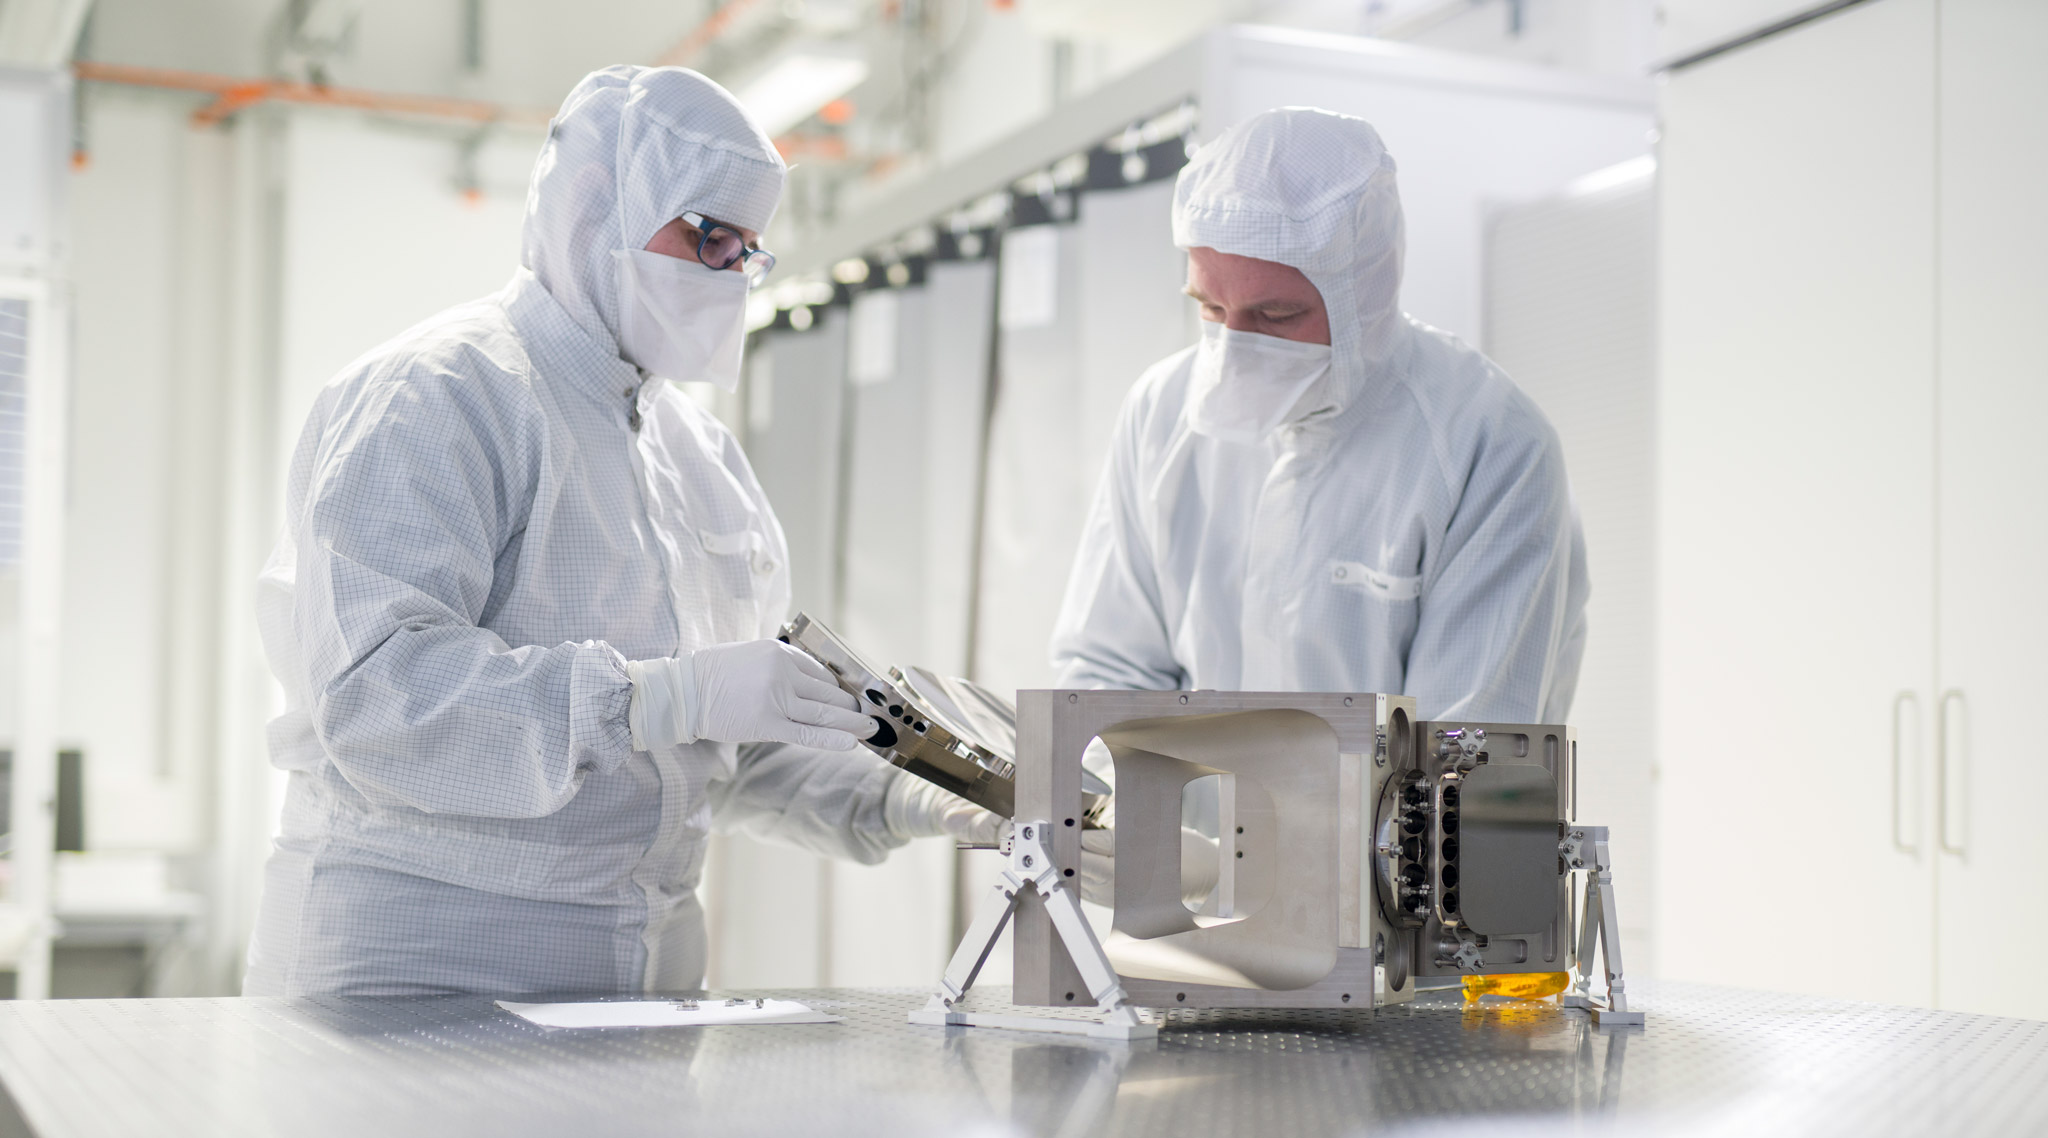 Two researchers in cleanroom clothing assemble components of a space telescope